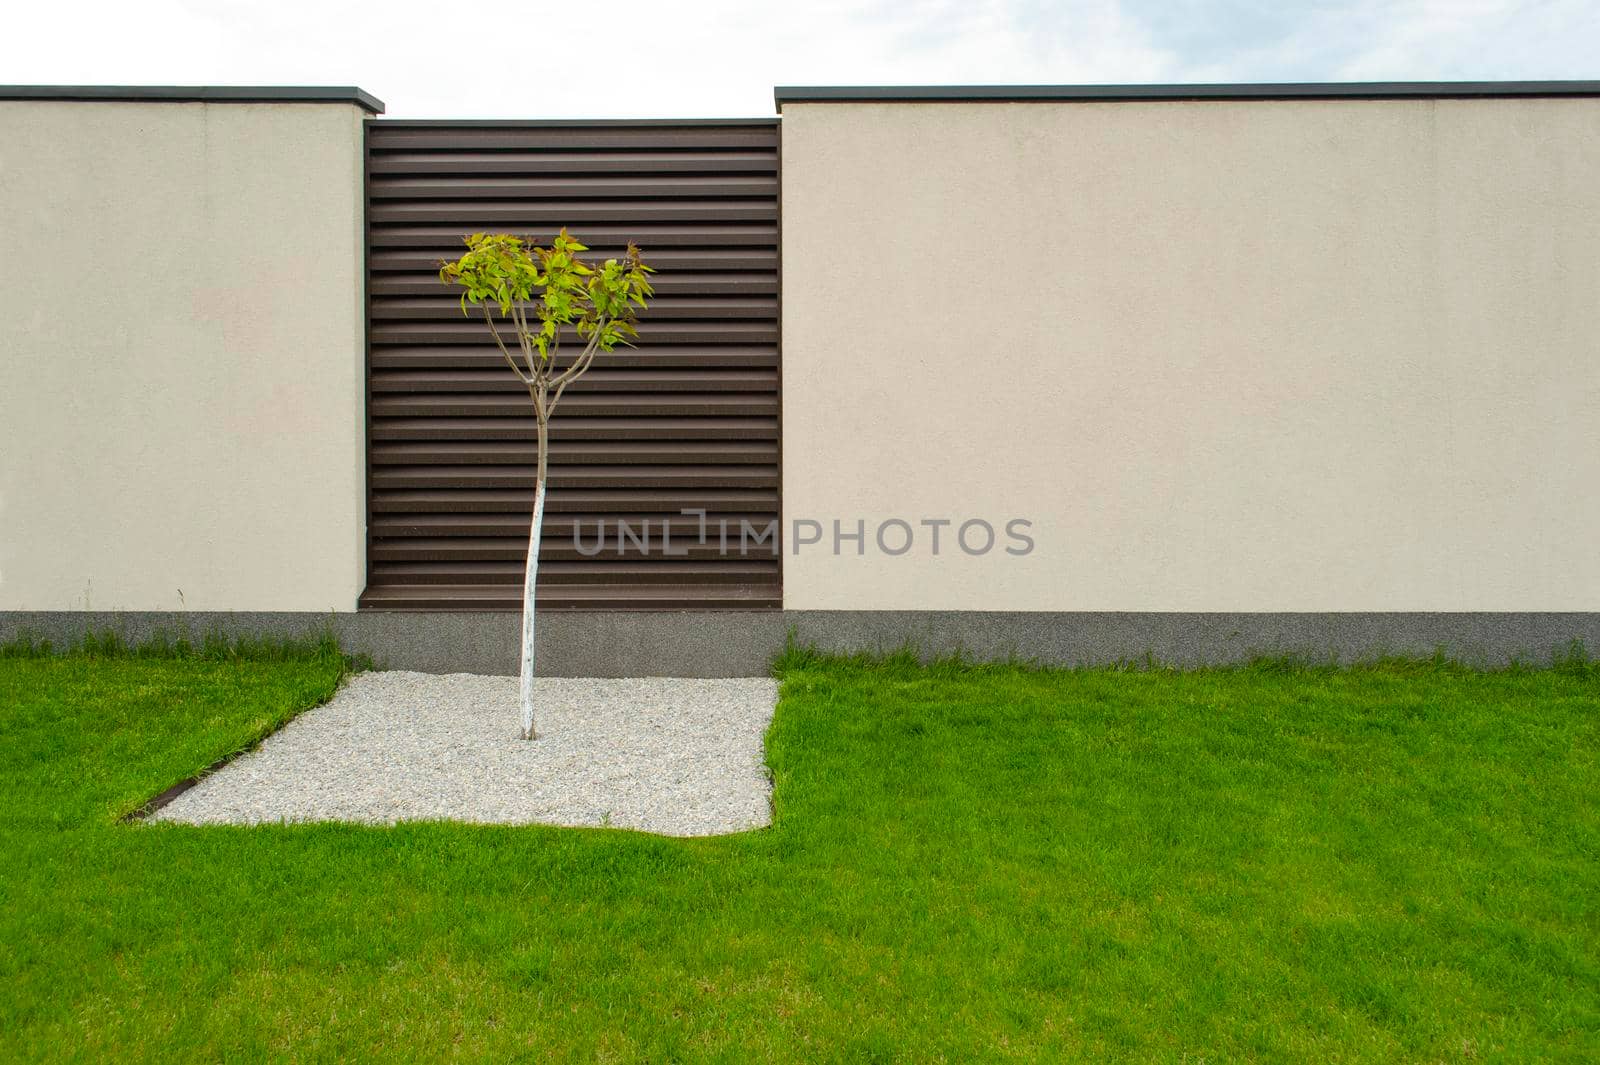 Tree in a square area of stones on the green grass, in the background of a brown and gray concrete fence. Idea for backyard landscaping. Space for text. by mtx